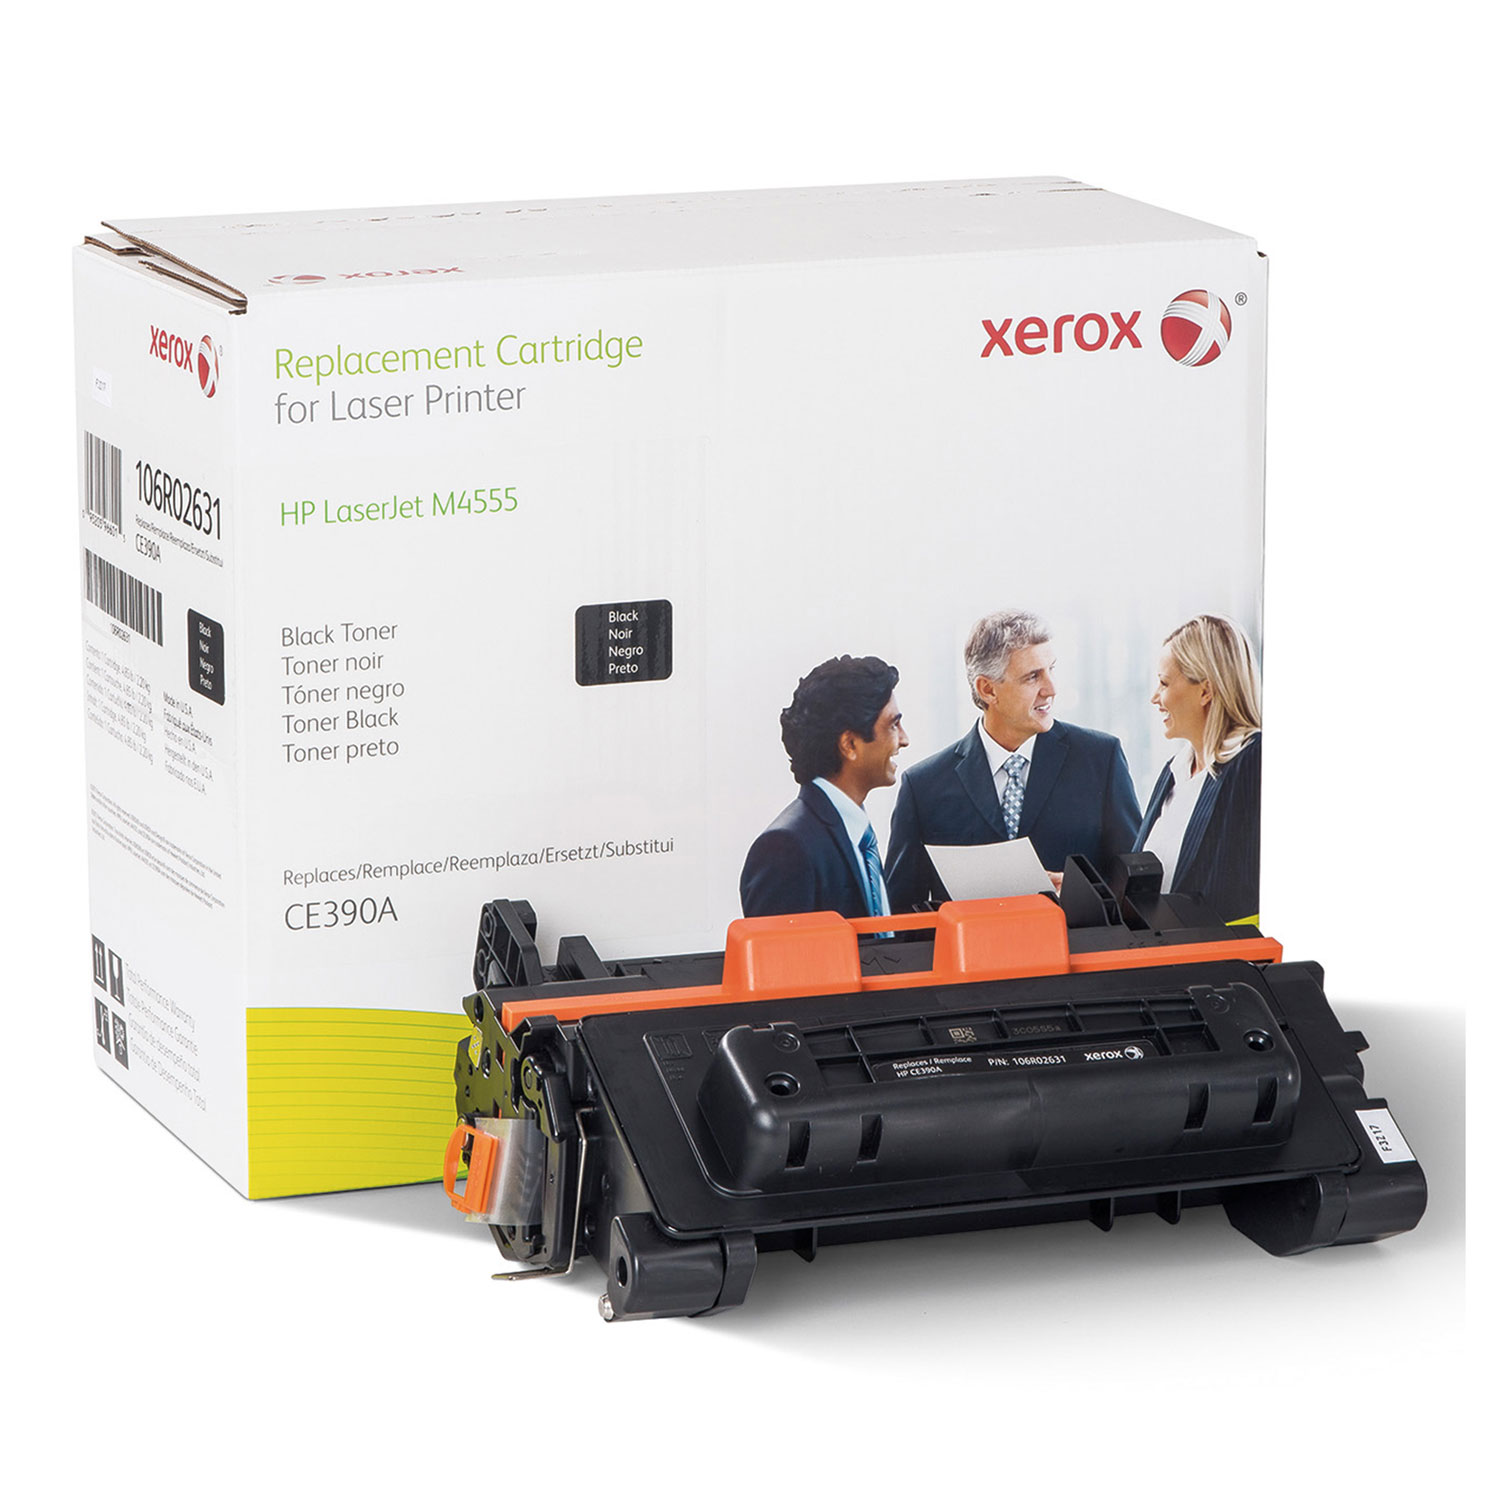  Xerox 106R02631 106R02631 Replacement Toner for CE390A (90A), 10000 Page Yield, Black (XER106R02631) 